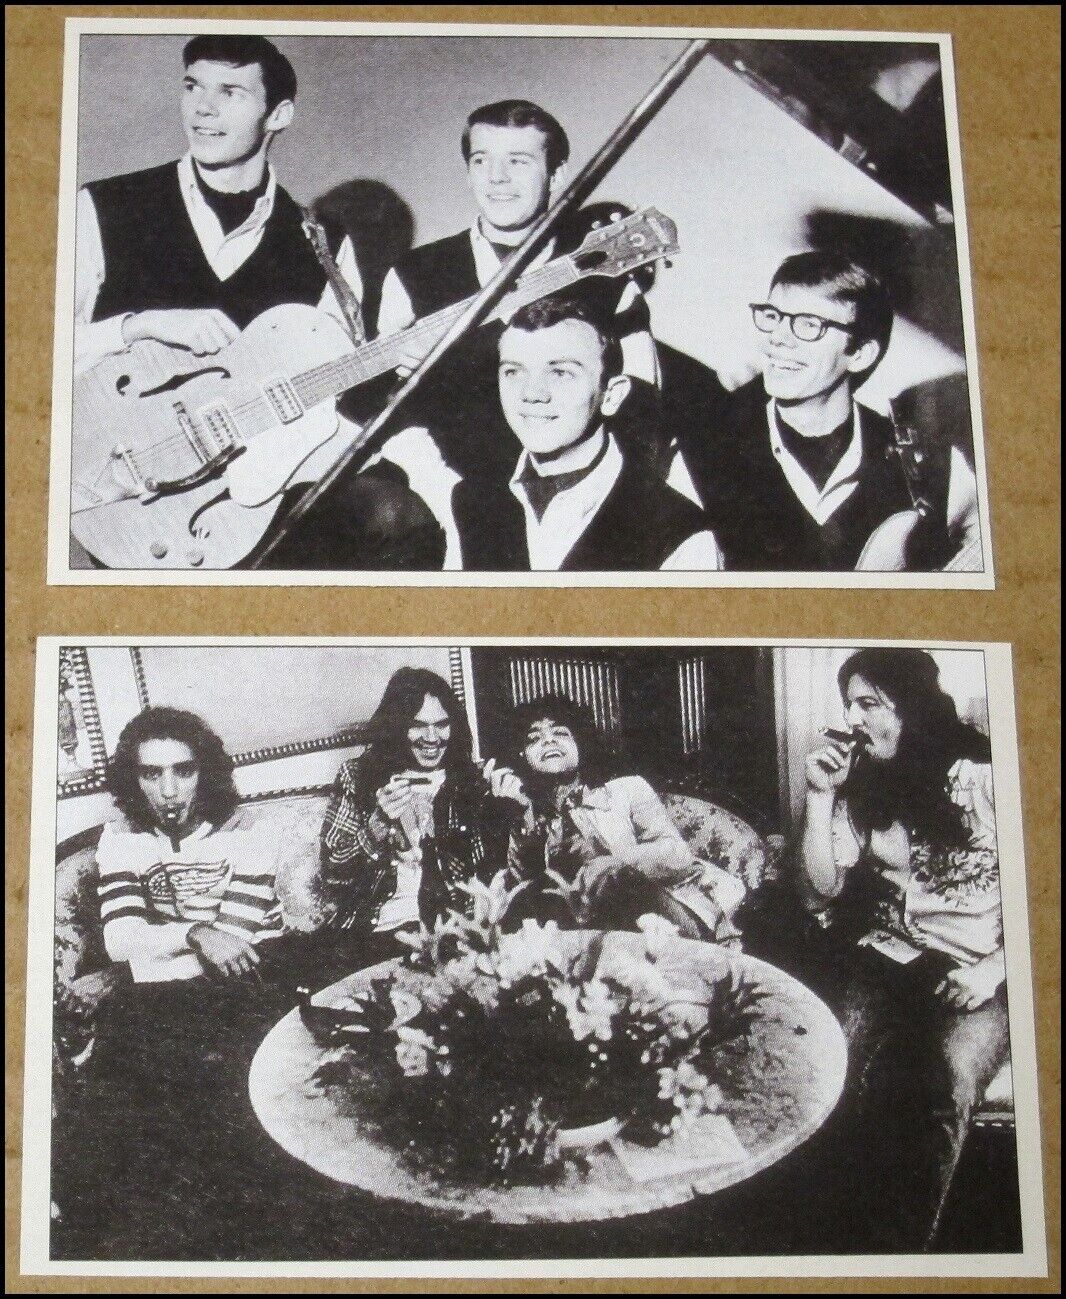 2006 Neil Young RS Photo Clippings The Squires 1964 Crazy Horse 1975 3.5